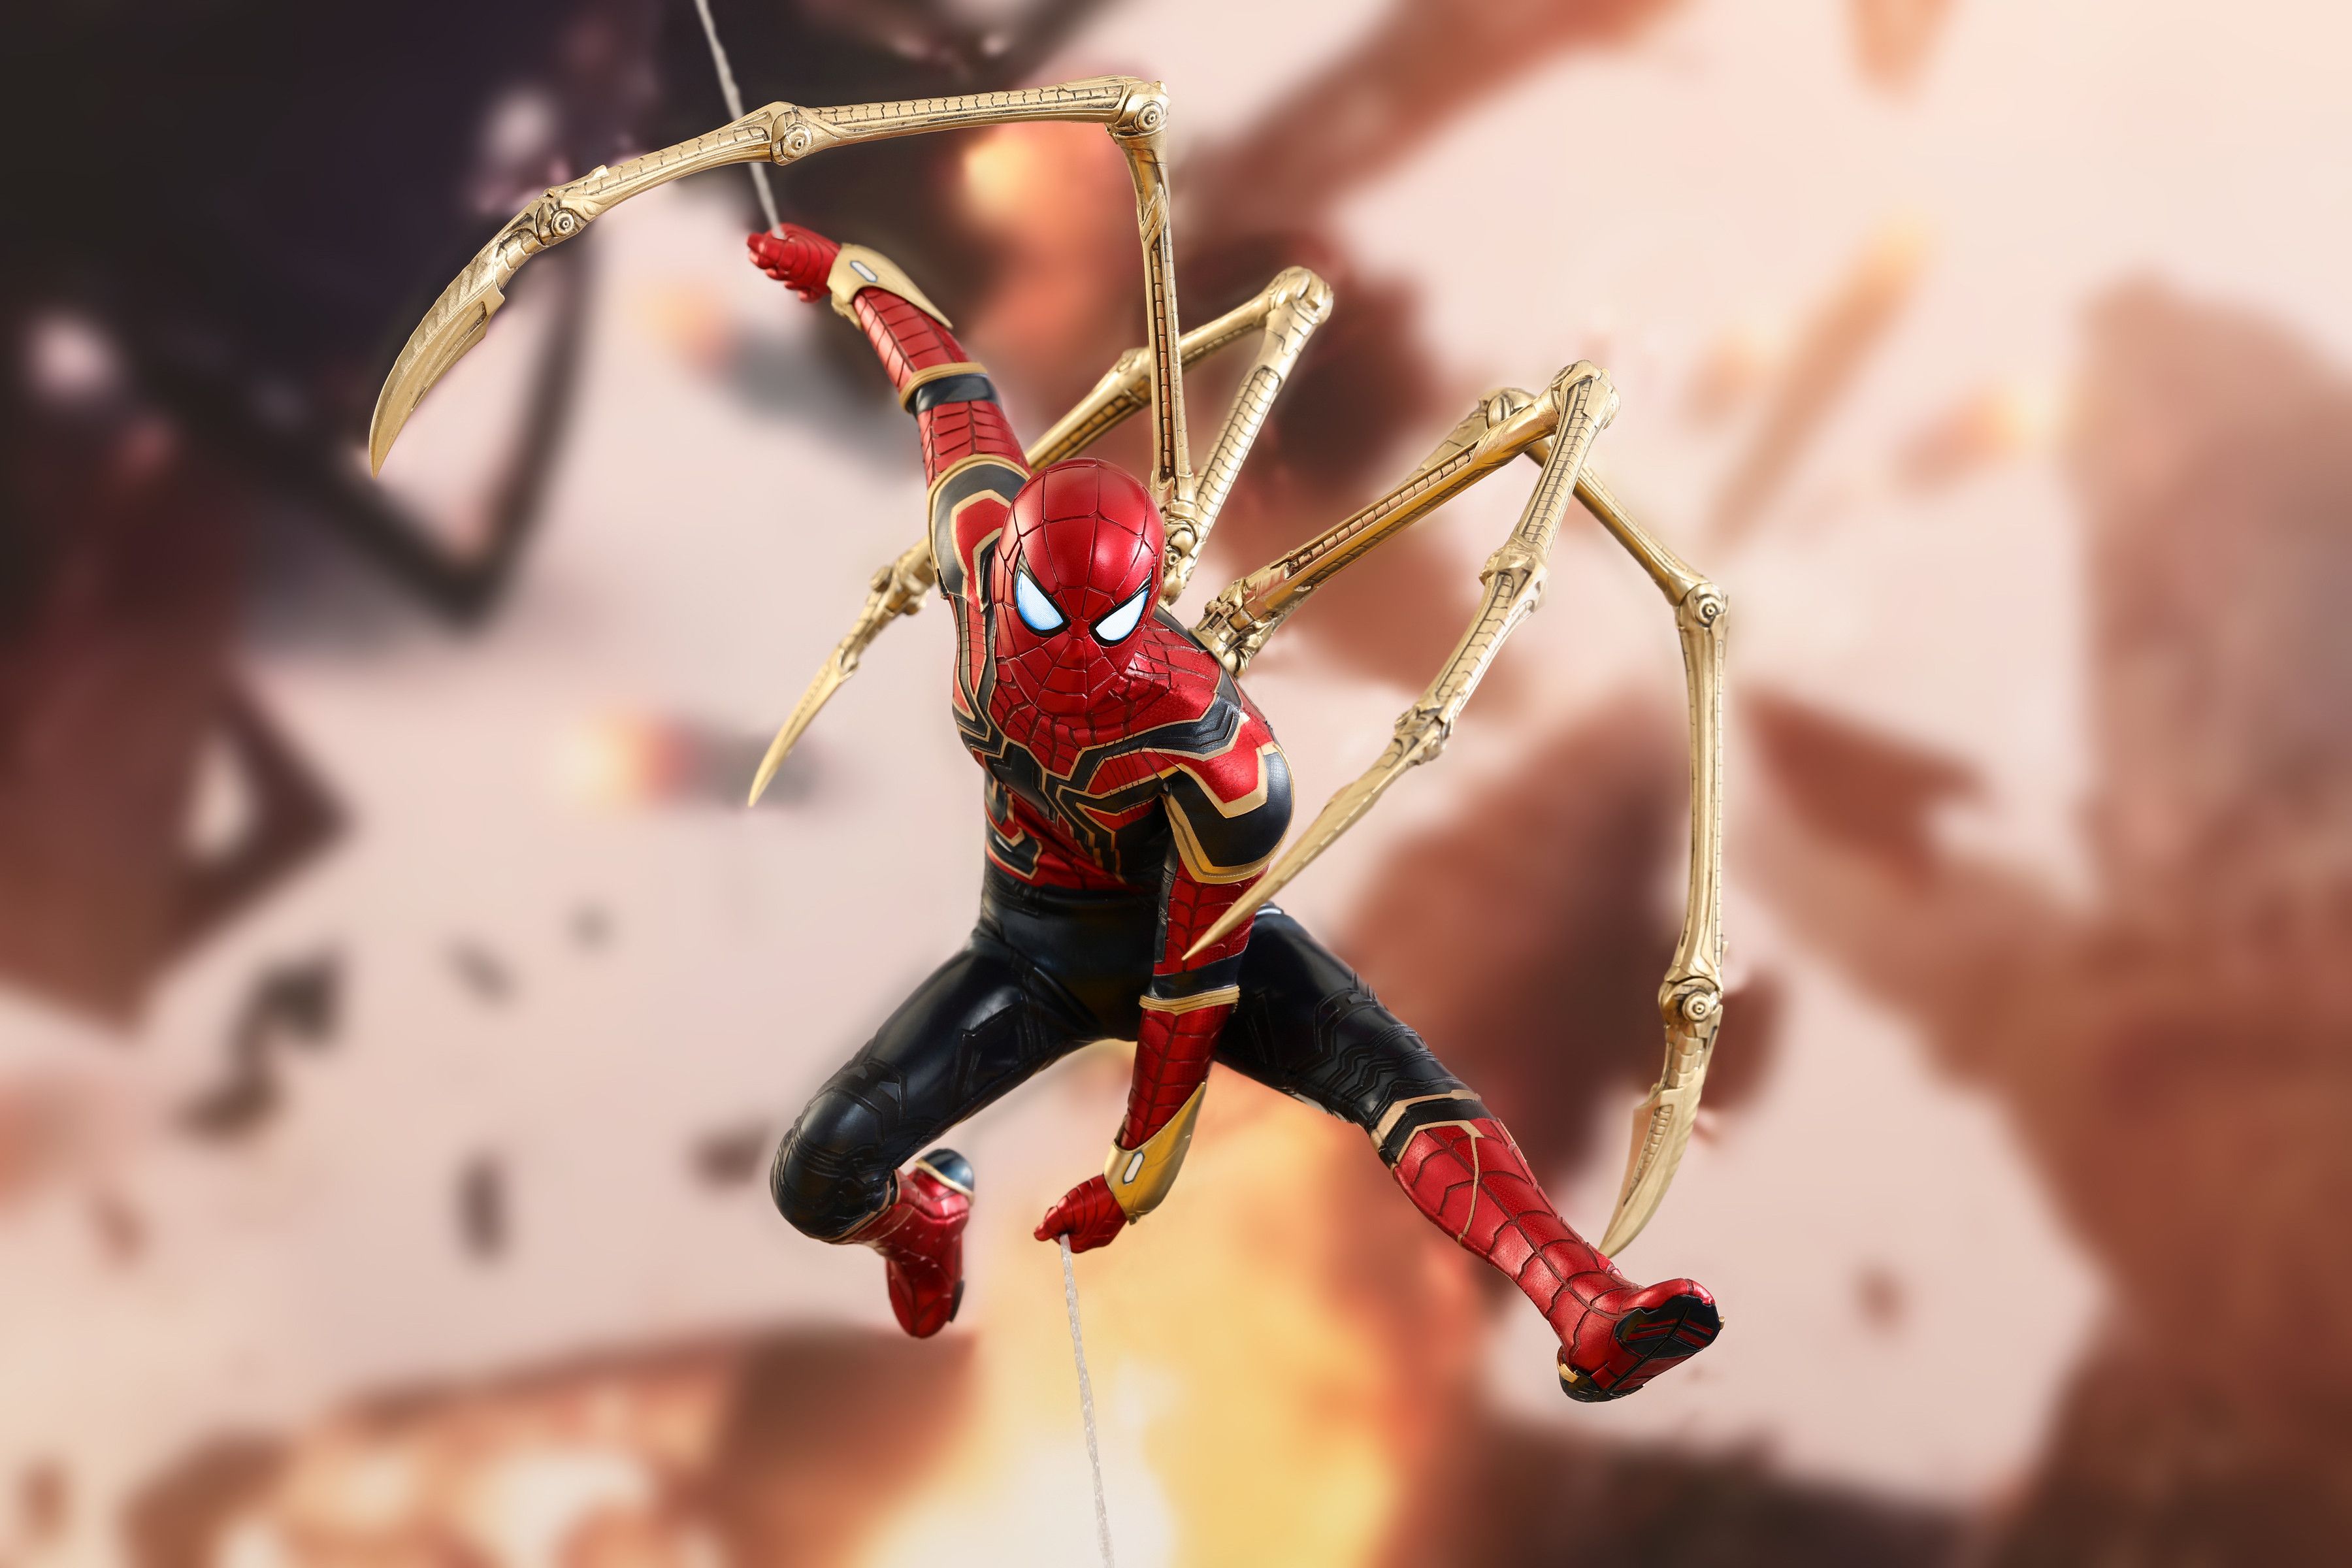 Iron Spider Man K Wallpapers Wallpaper Cave